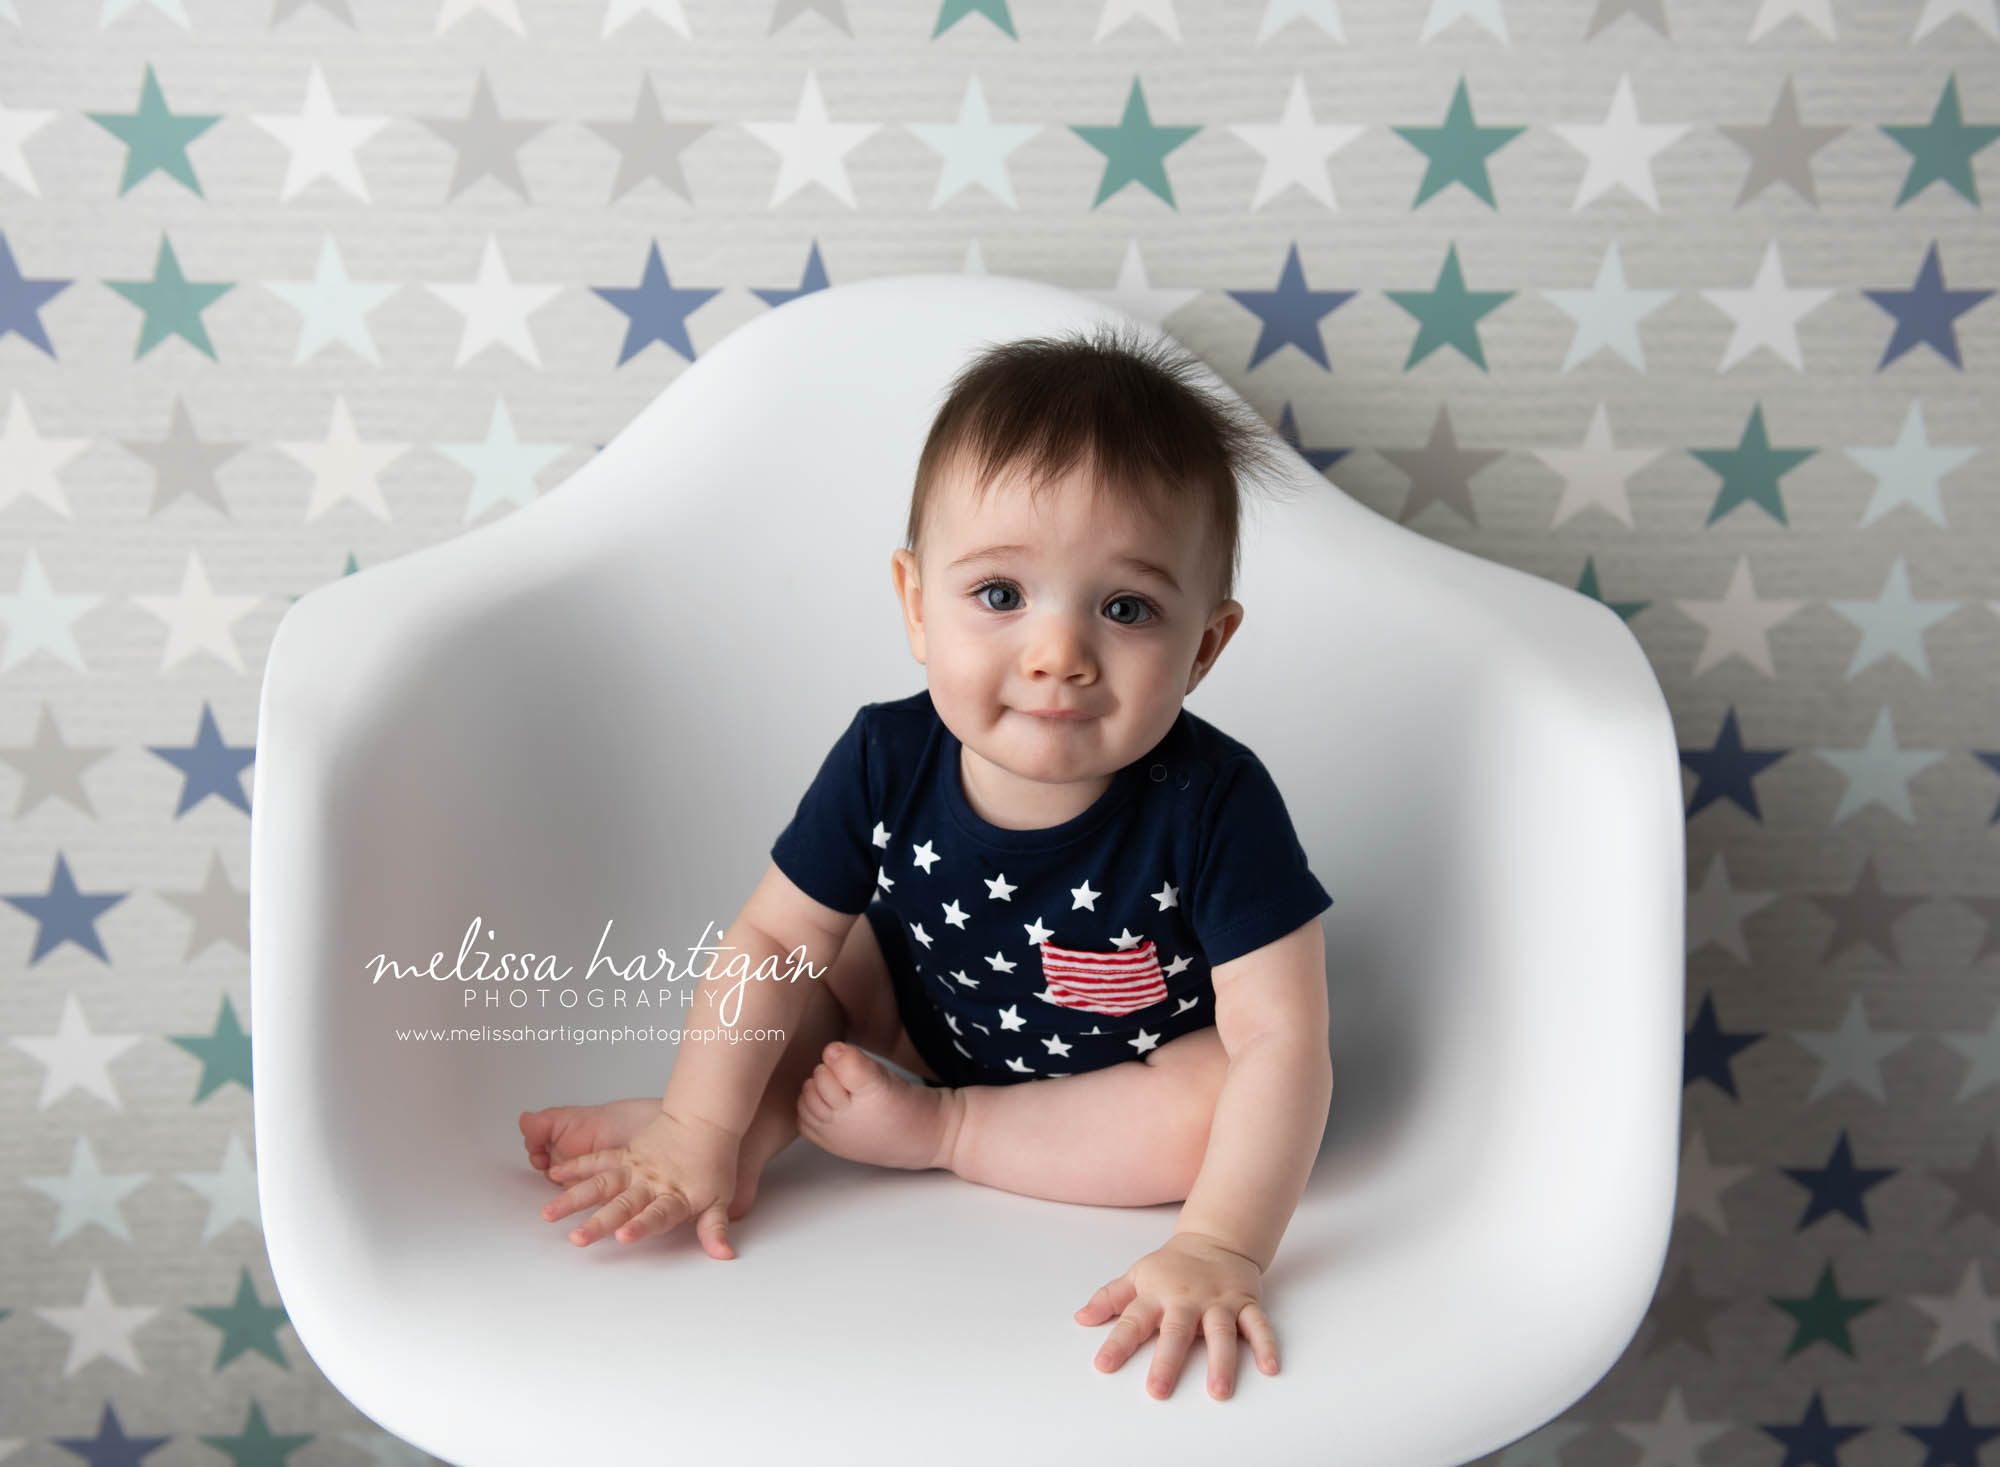 Baby boy sitting in white chair with stars backdrop